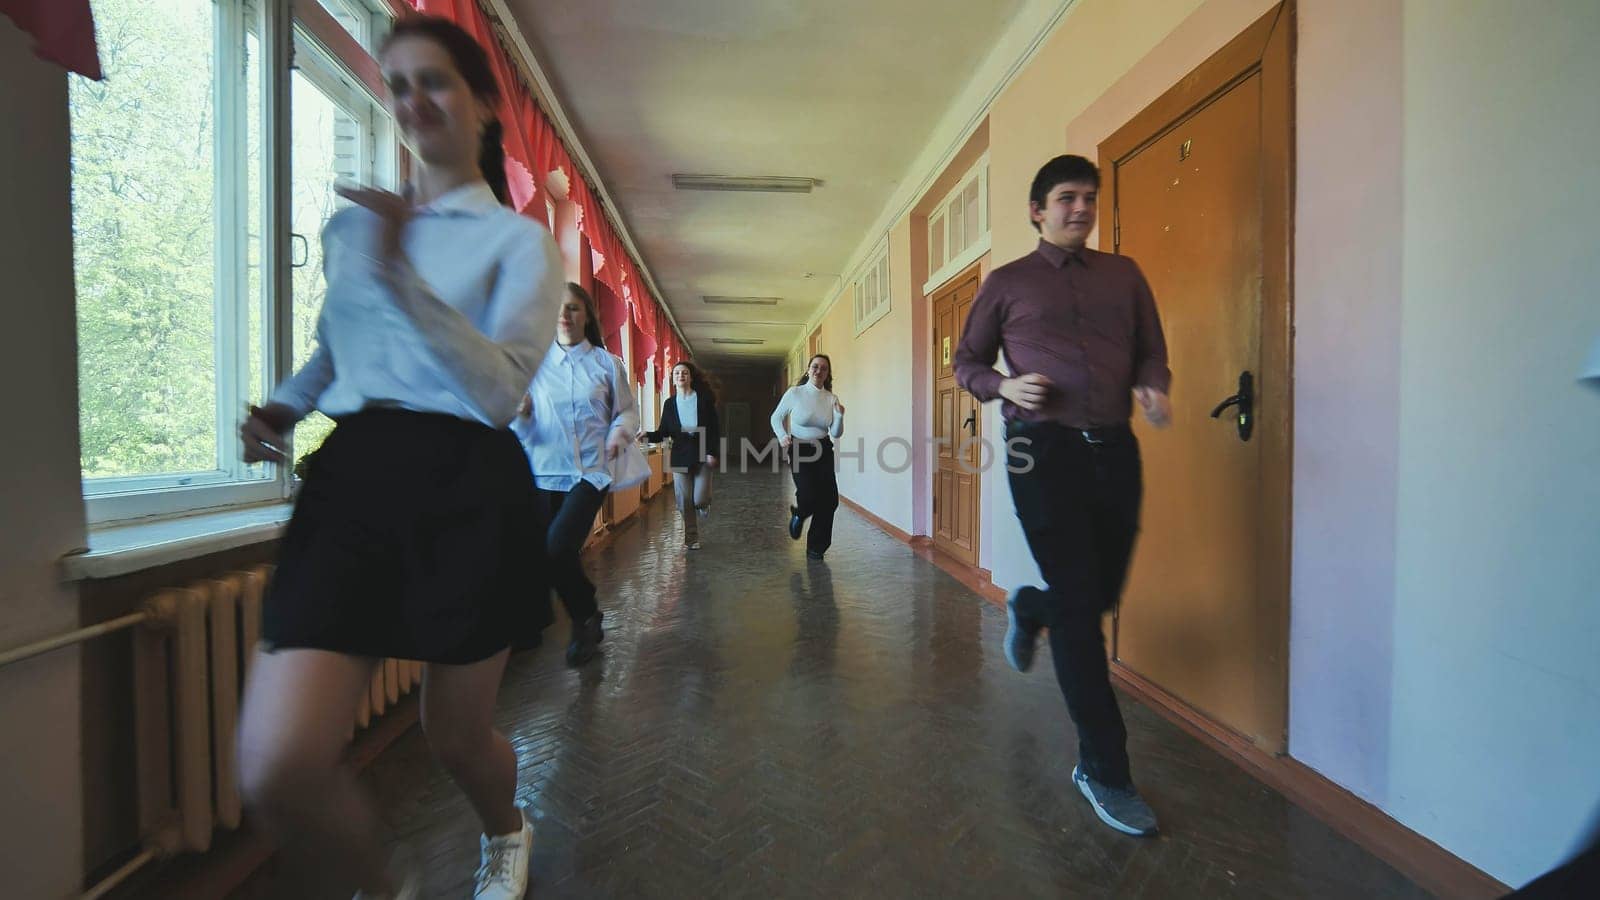 A down-syndrome school boy with group of children in corridor, running. by DovidPro